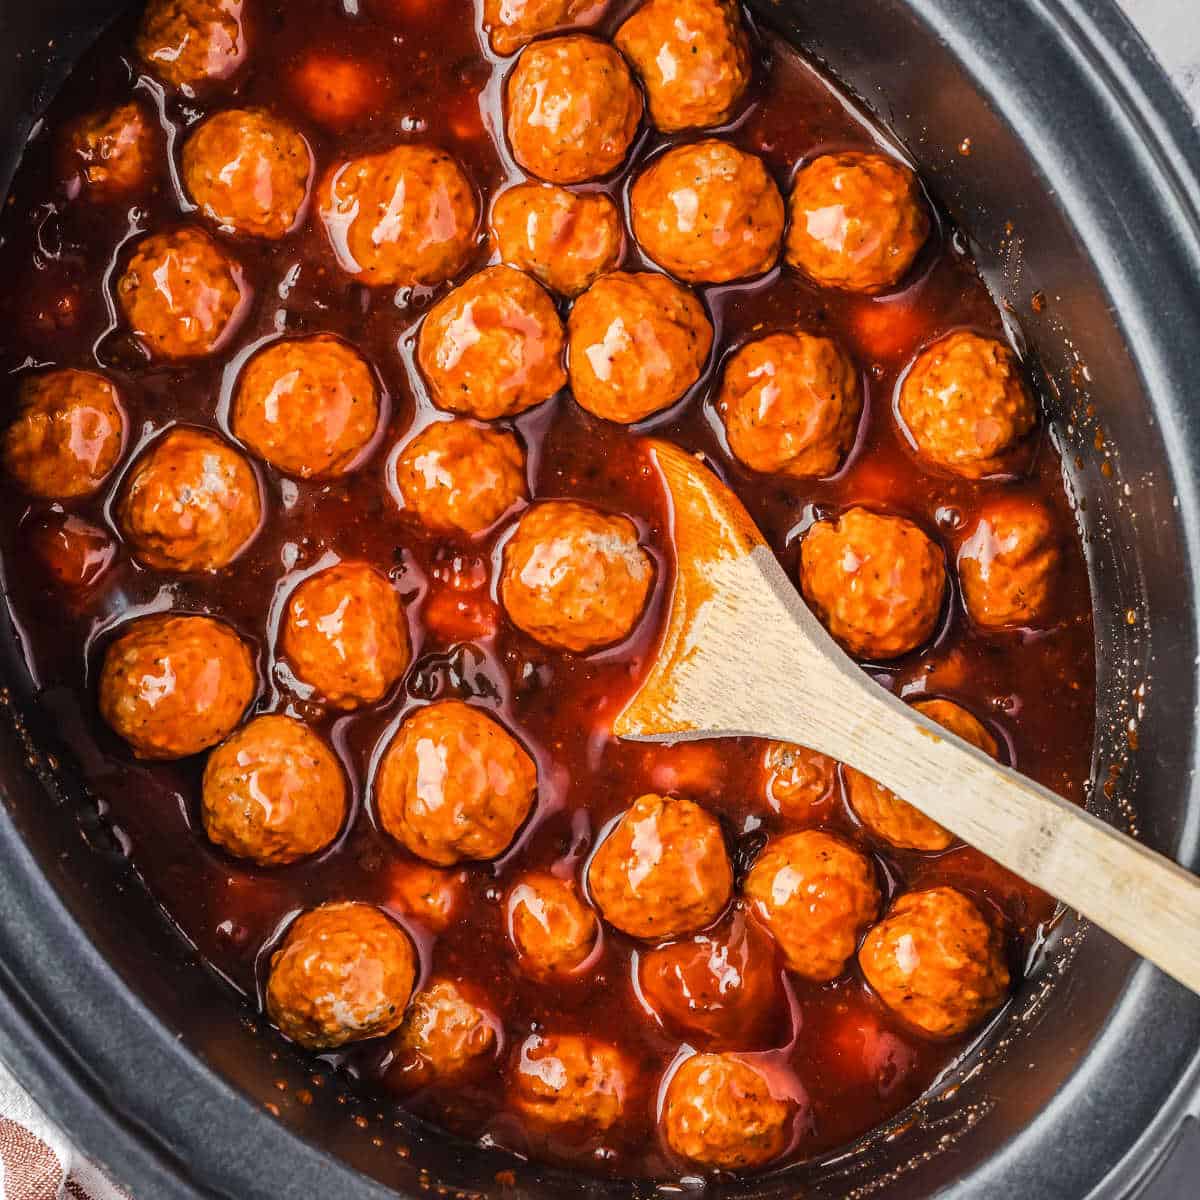 https://www.taketwotapas.com/wp-content/uploads/2021/11/Sweet-and-Sour-Meatballs-Featured-Image.jpg